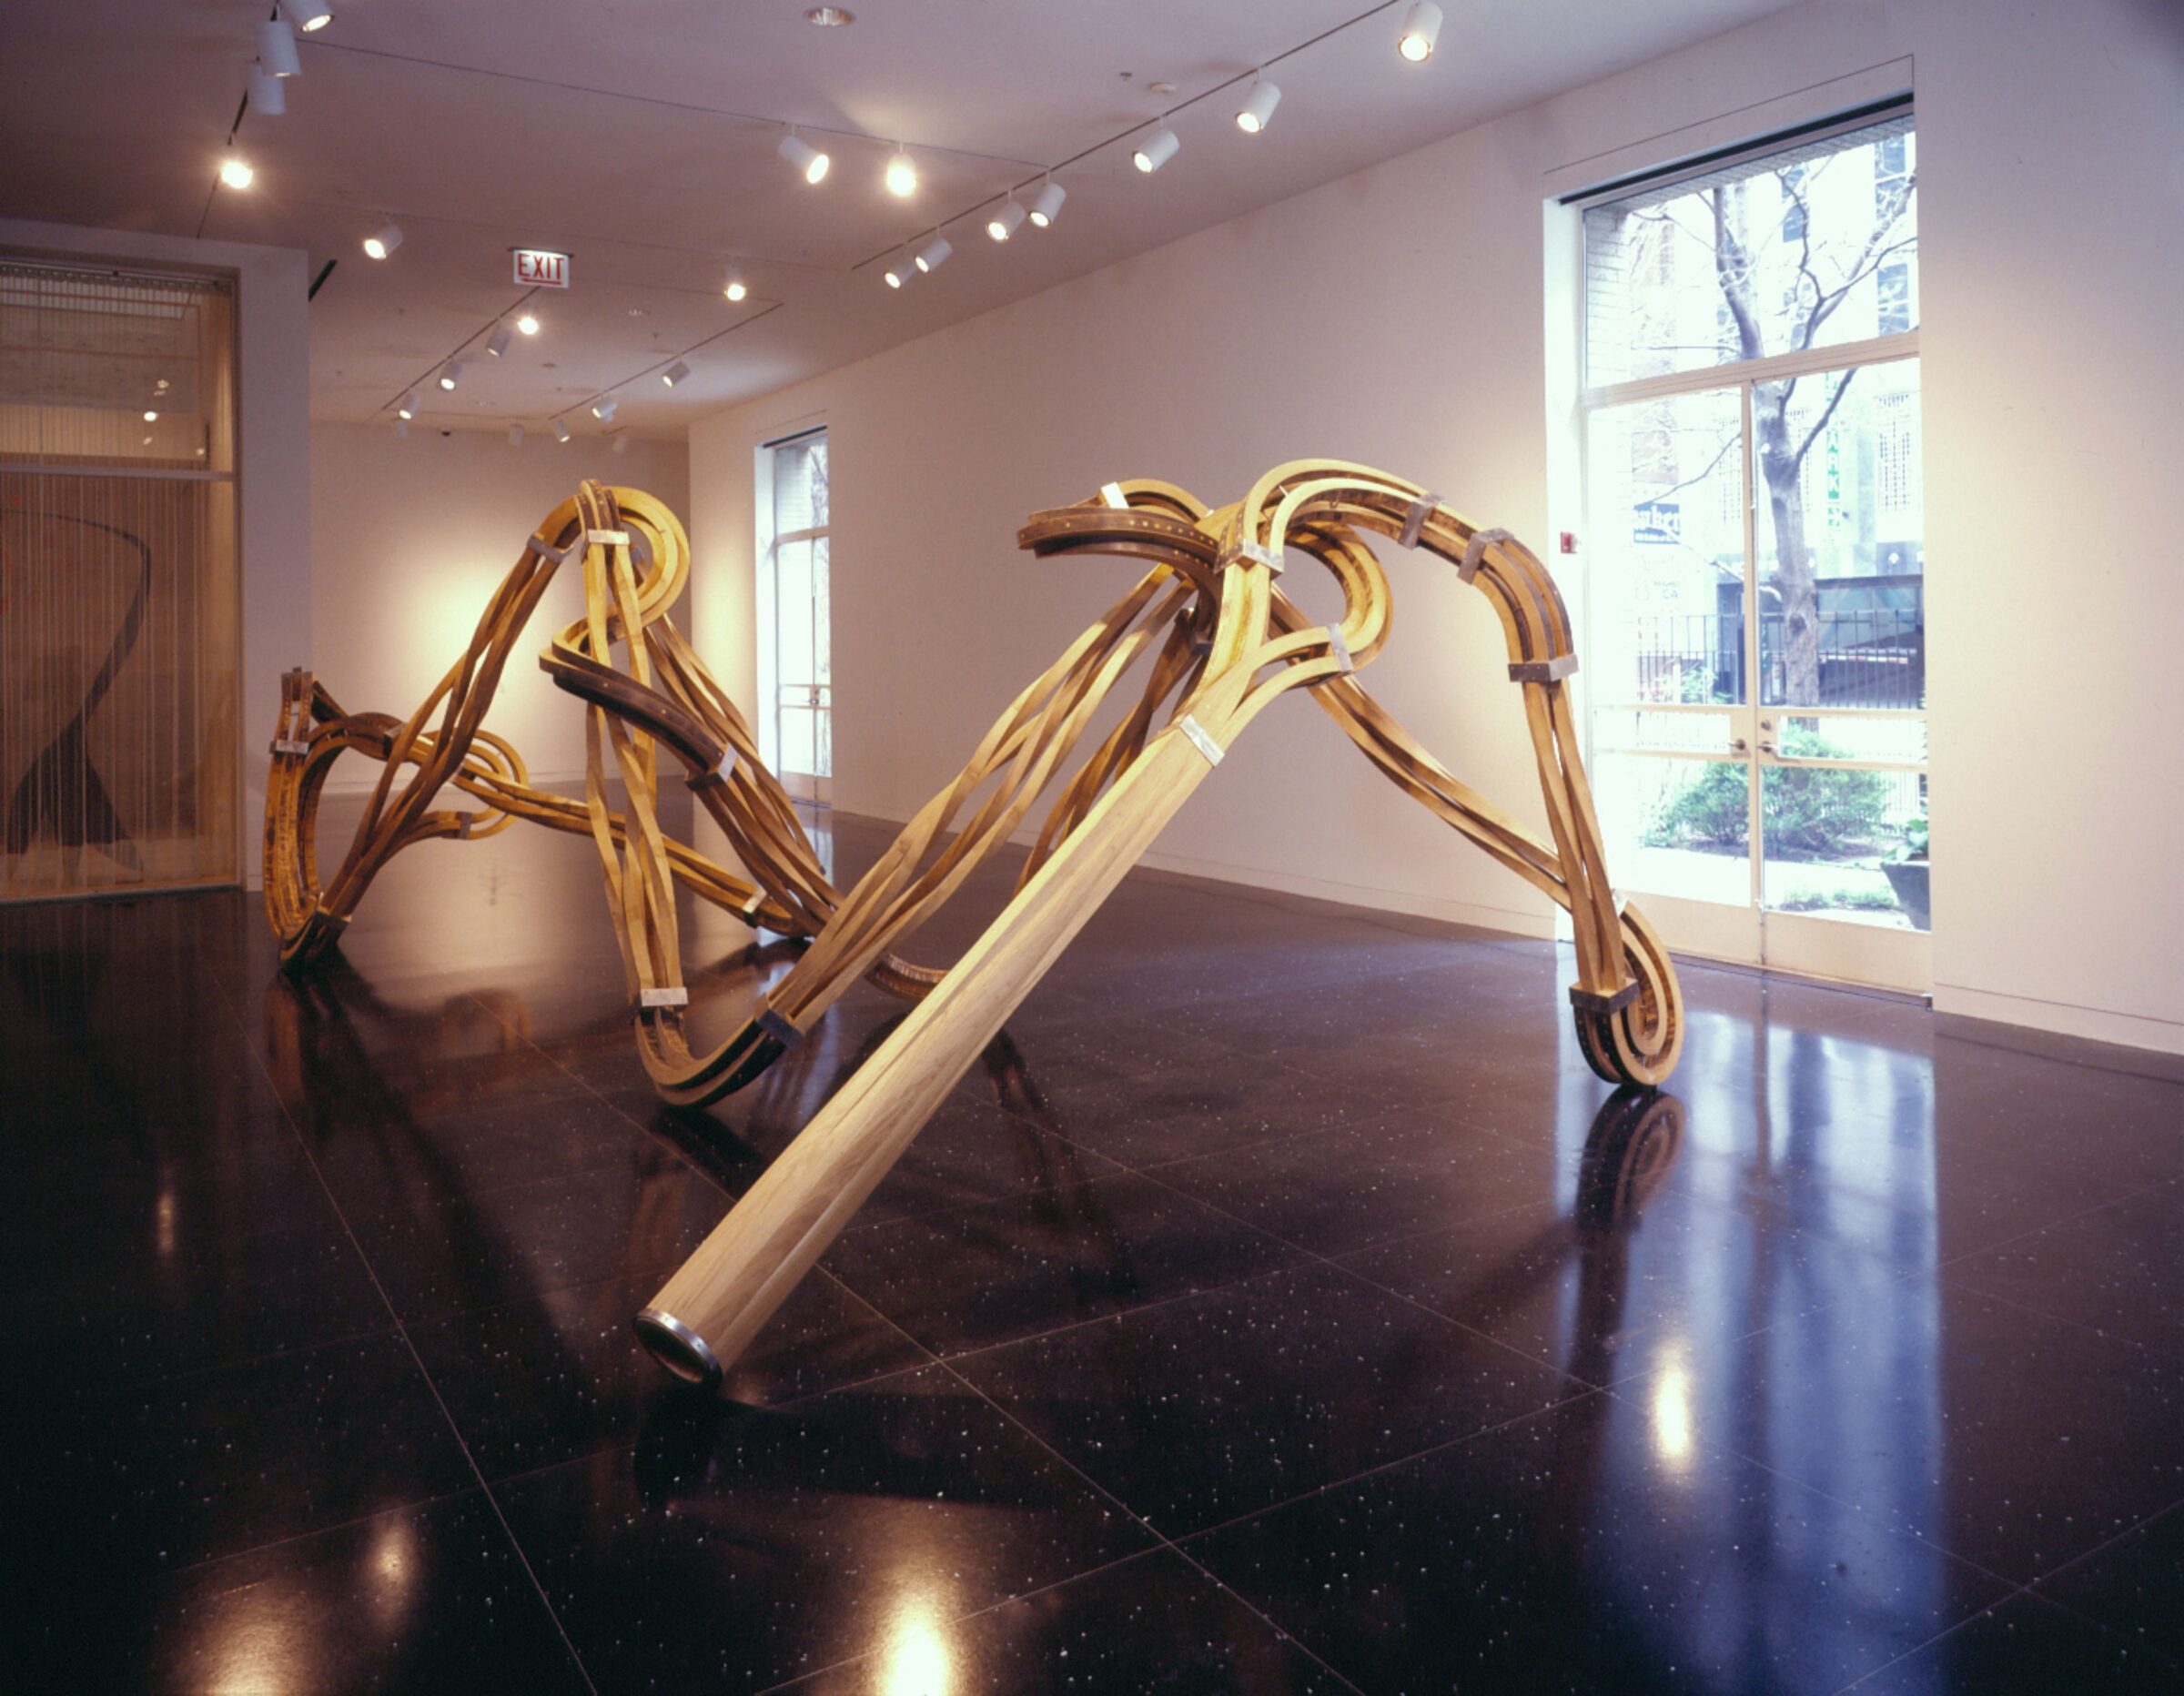 A large, tendril-like bronze sculpture occupies the majority of a white gallery space.